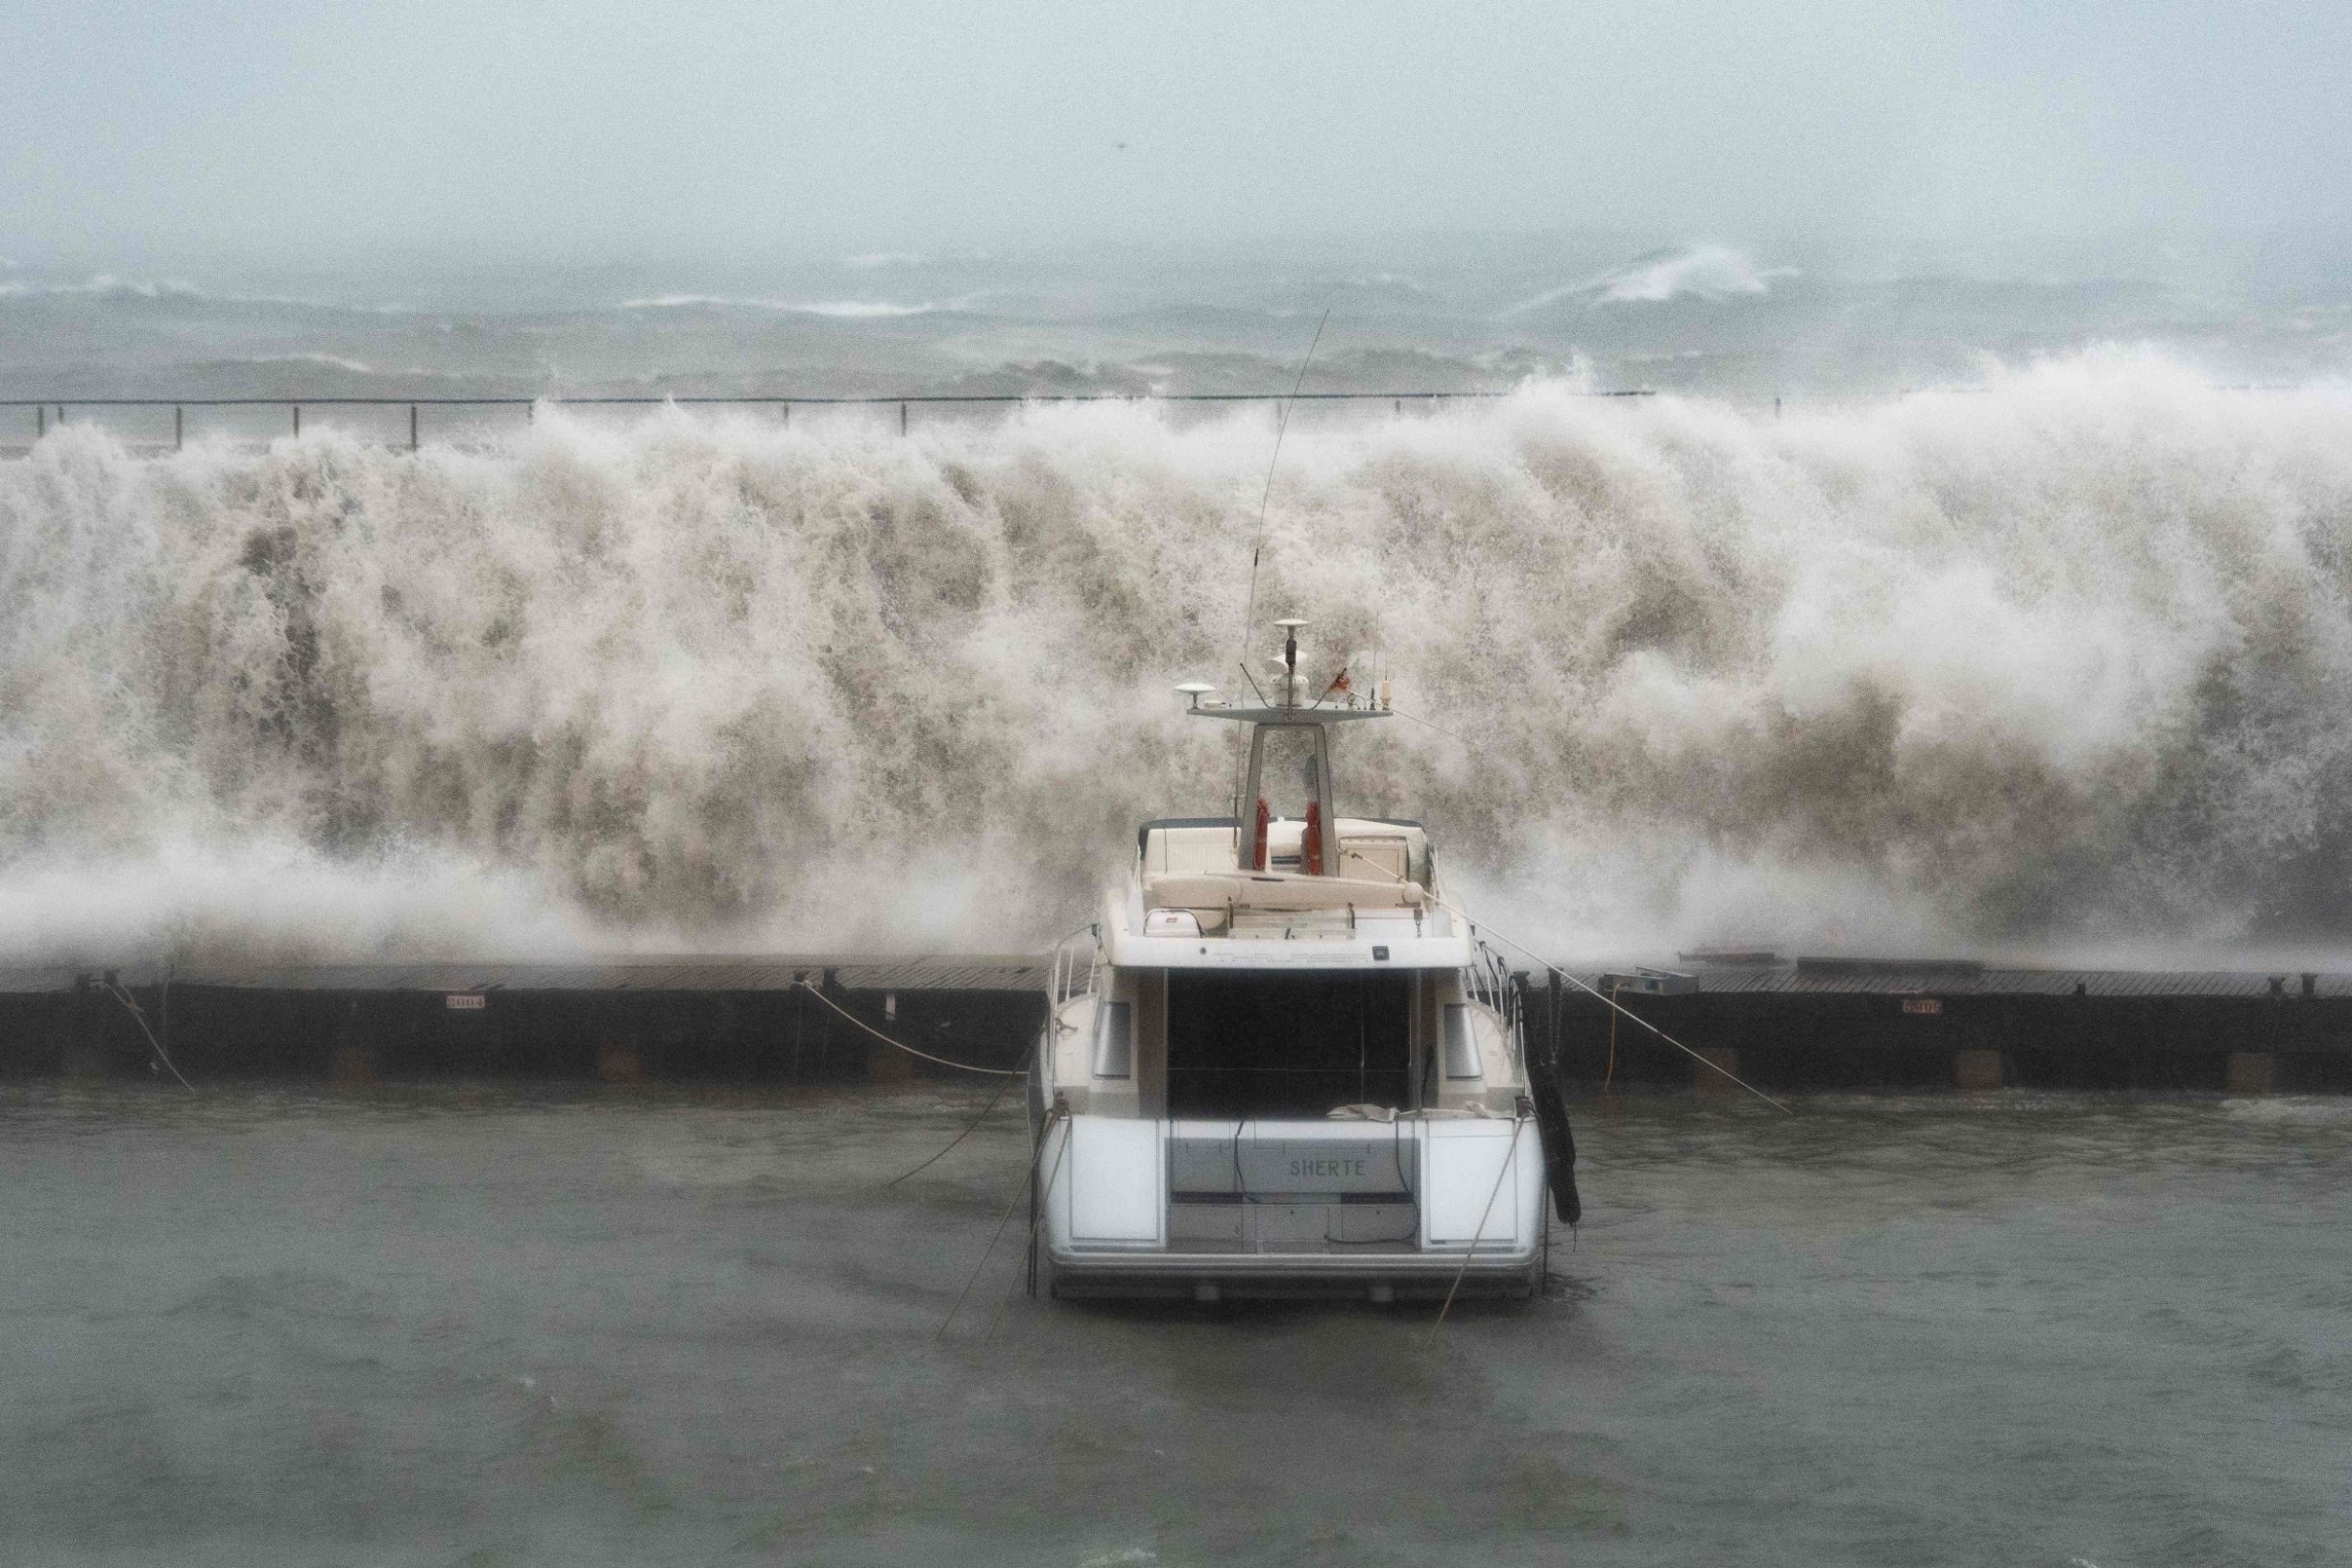 TOPSHOT - Big waves overpass a breakwater at the Port Olympic marina in Barcelona as storm Gloria batters Spanish eastern coast on January 21, 2020. - Freezing winds, heavy snow and rain lashed parts of Spain yesterday, killing three people, forcing the closure of schools that cancelled classes for nearly 200,000 students and disrupting travel, officials said. (Photo by Josep LAGO / AFP)